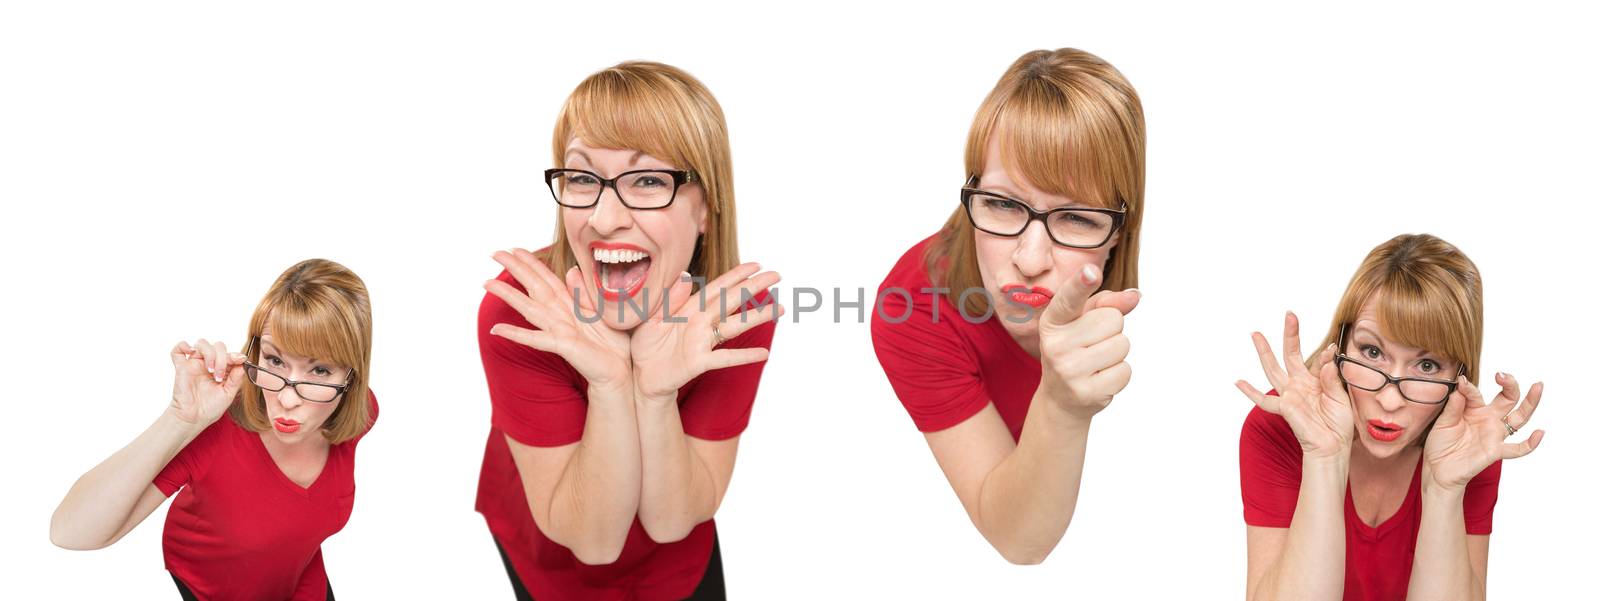 Set of Female Caucasian with Goofy Expressions Isolated on a White Background.